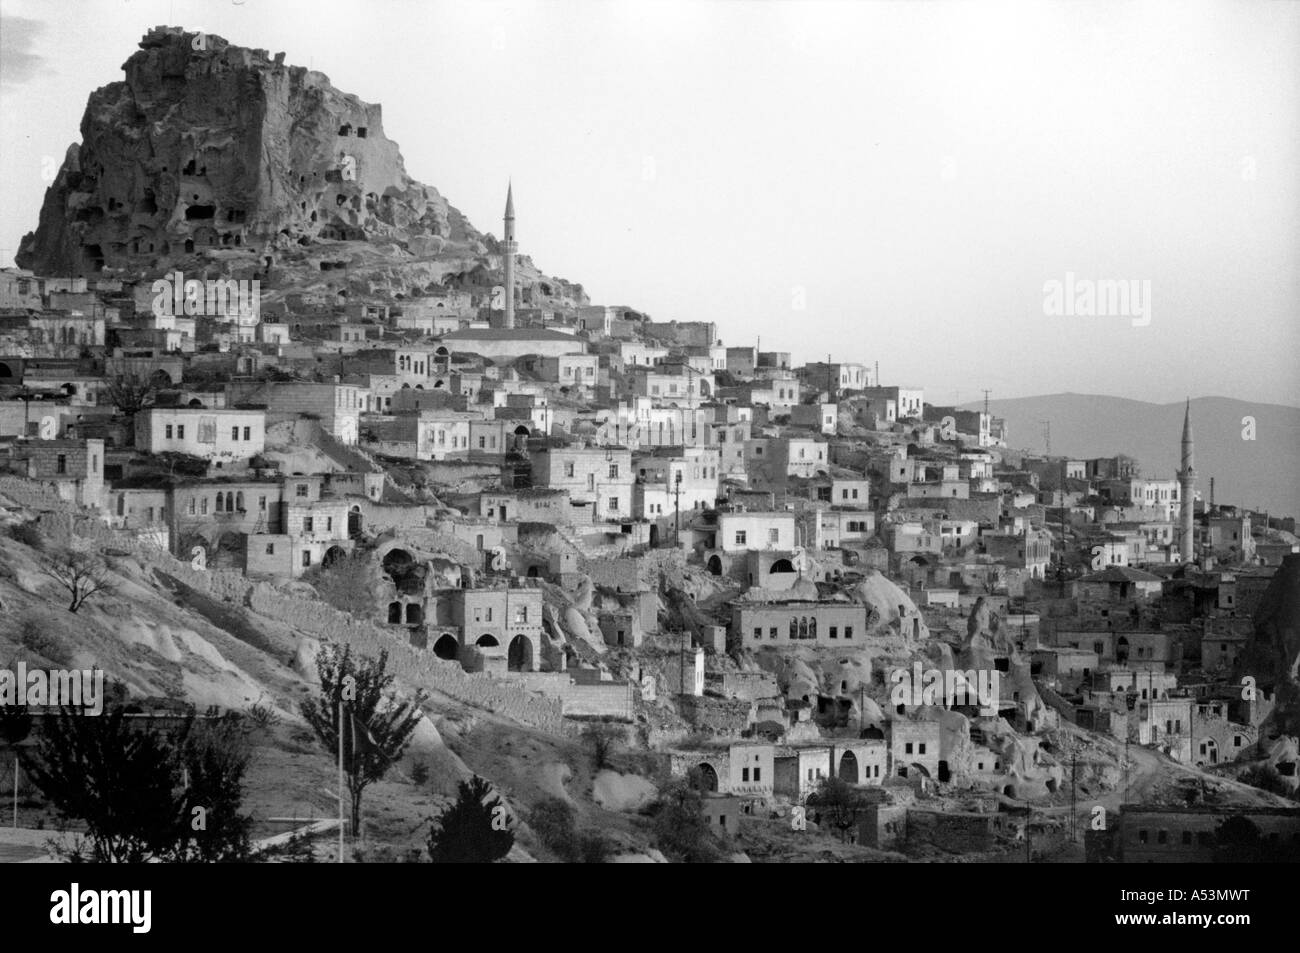 Painet ha1468 299 black and white landscape nevsehir cappadocia turkey country developing nation less economically developed Stock Photo